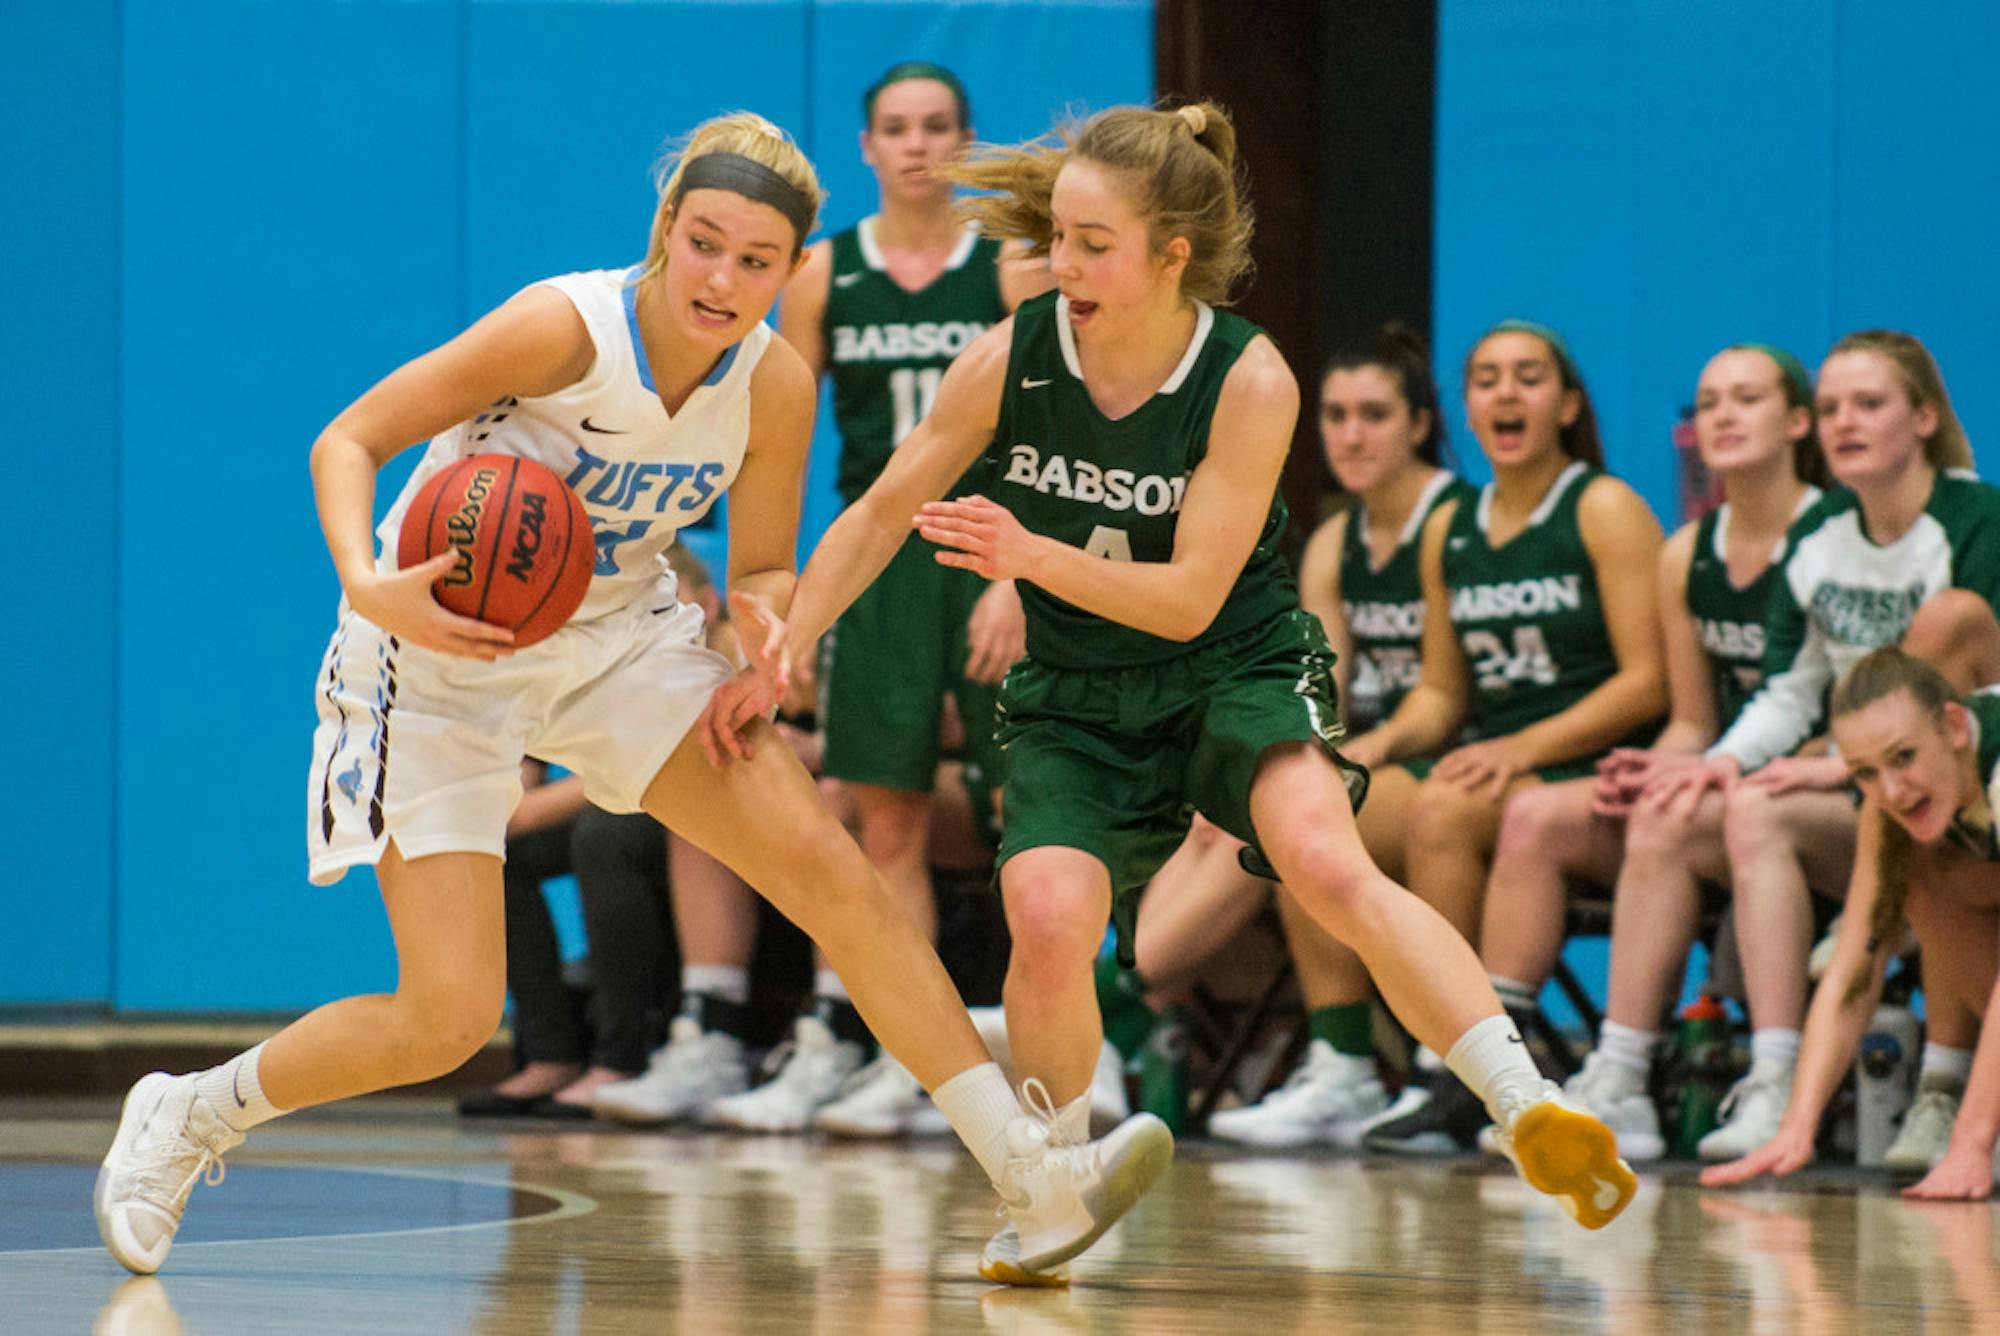 2018-01-29-Tufts-Womens-Basketball-v-Babson-RBE-027